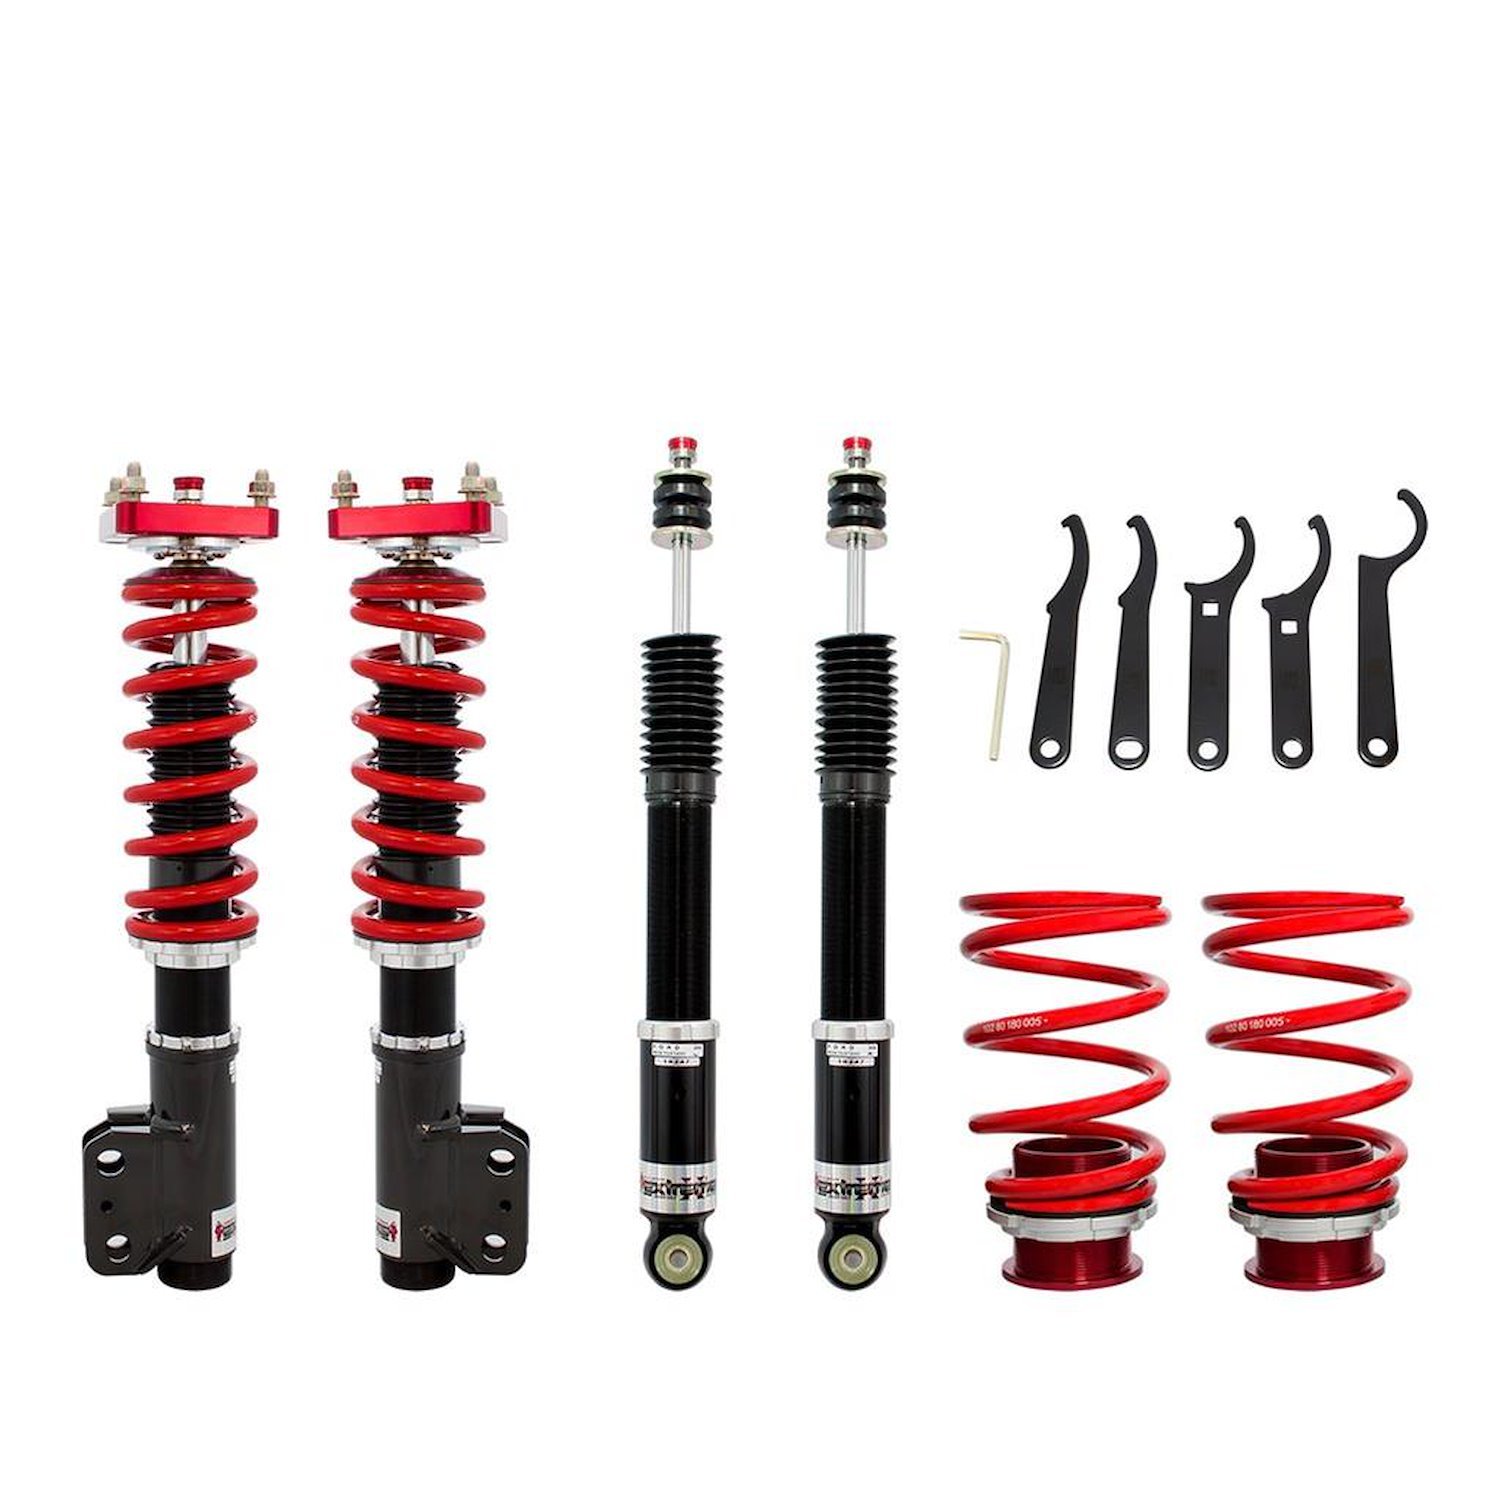 PED-162366 Extreme XA Coilover Kit, Ford Mustang 1995, 2004